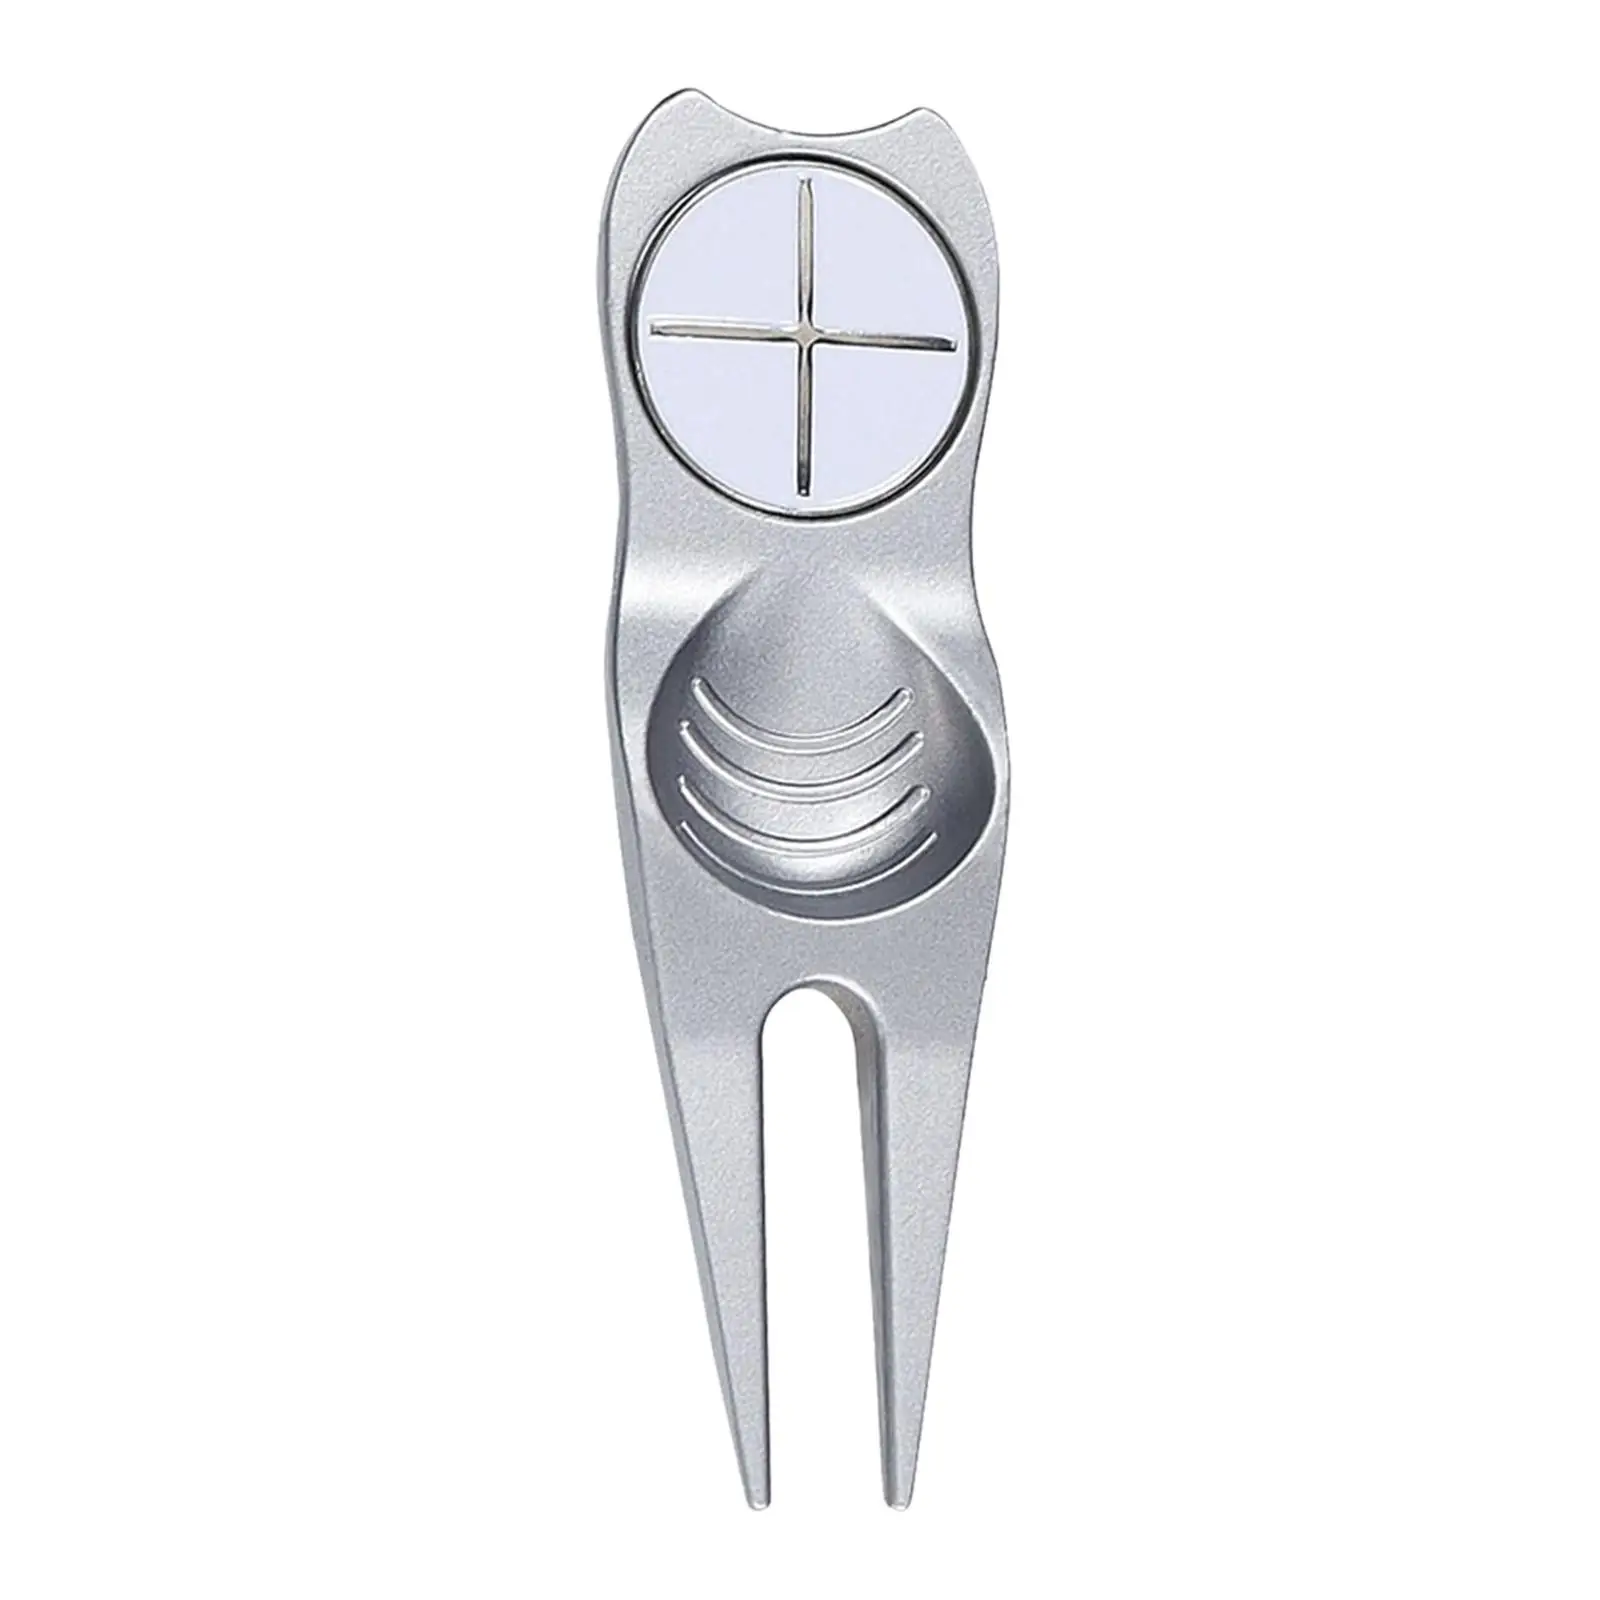 Golf Divot Tool Ball Marker in 2 Colors Alloy Golf Accessories